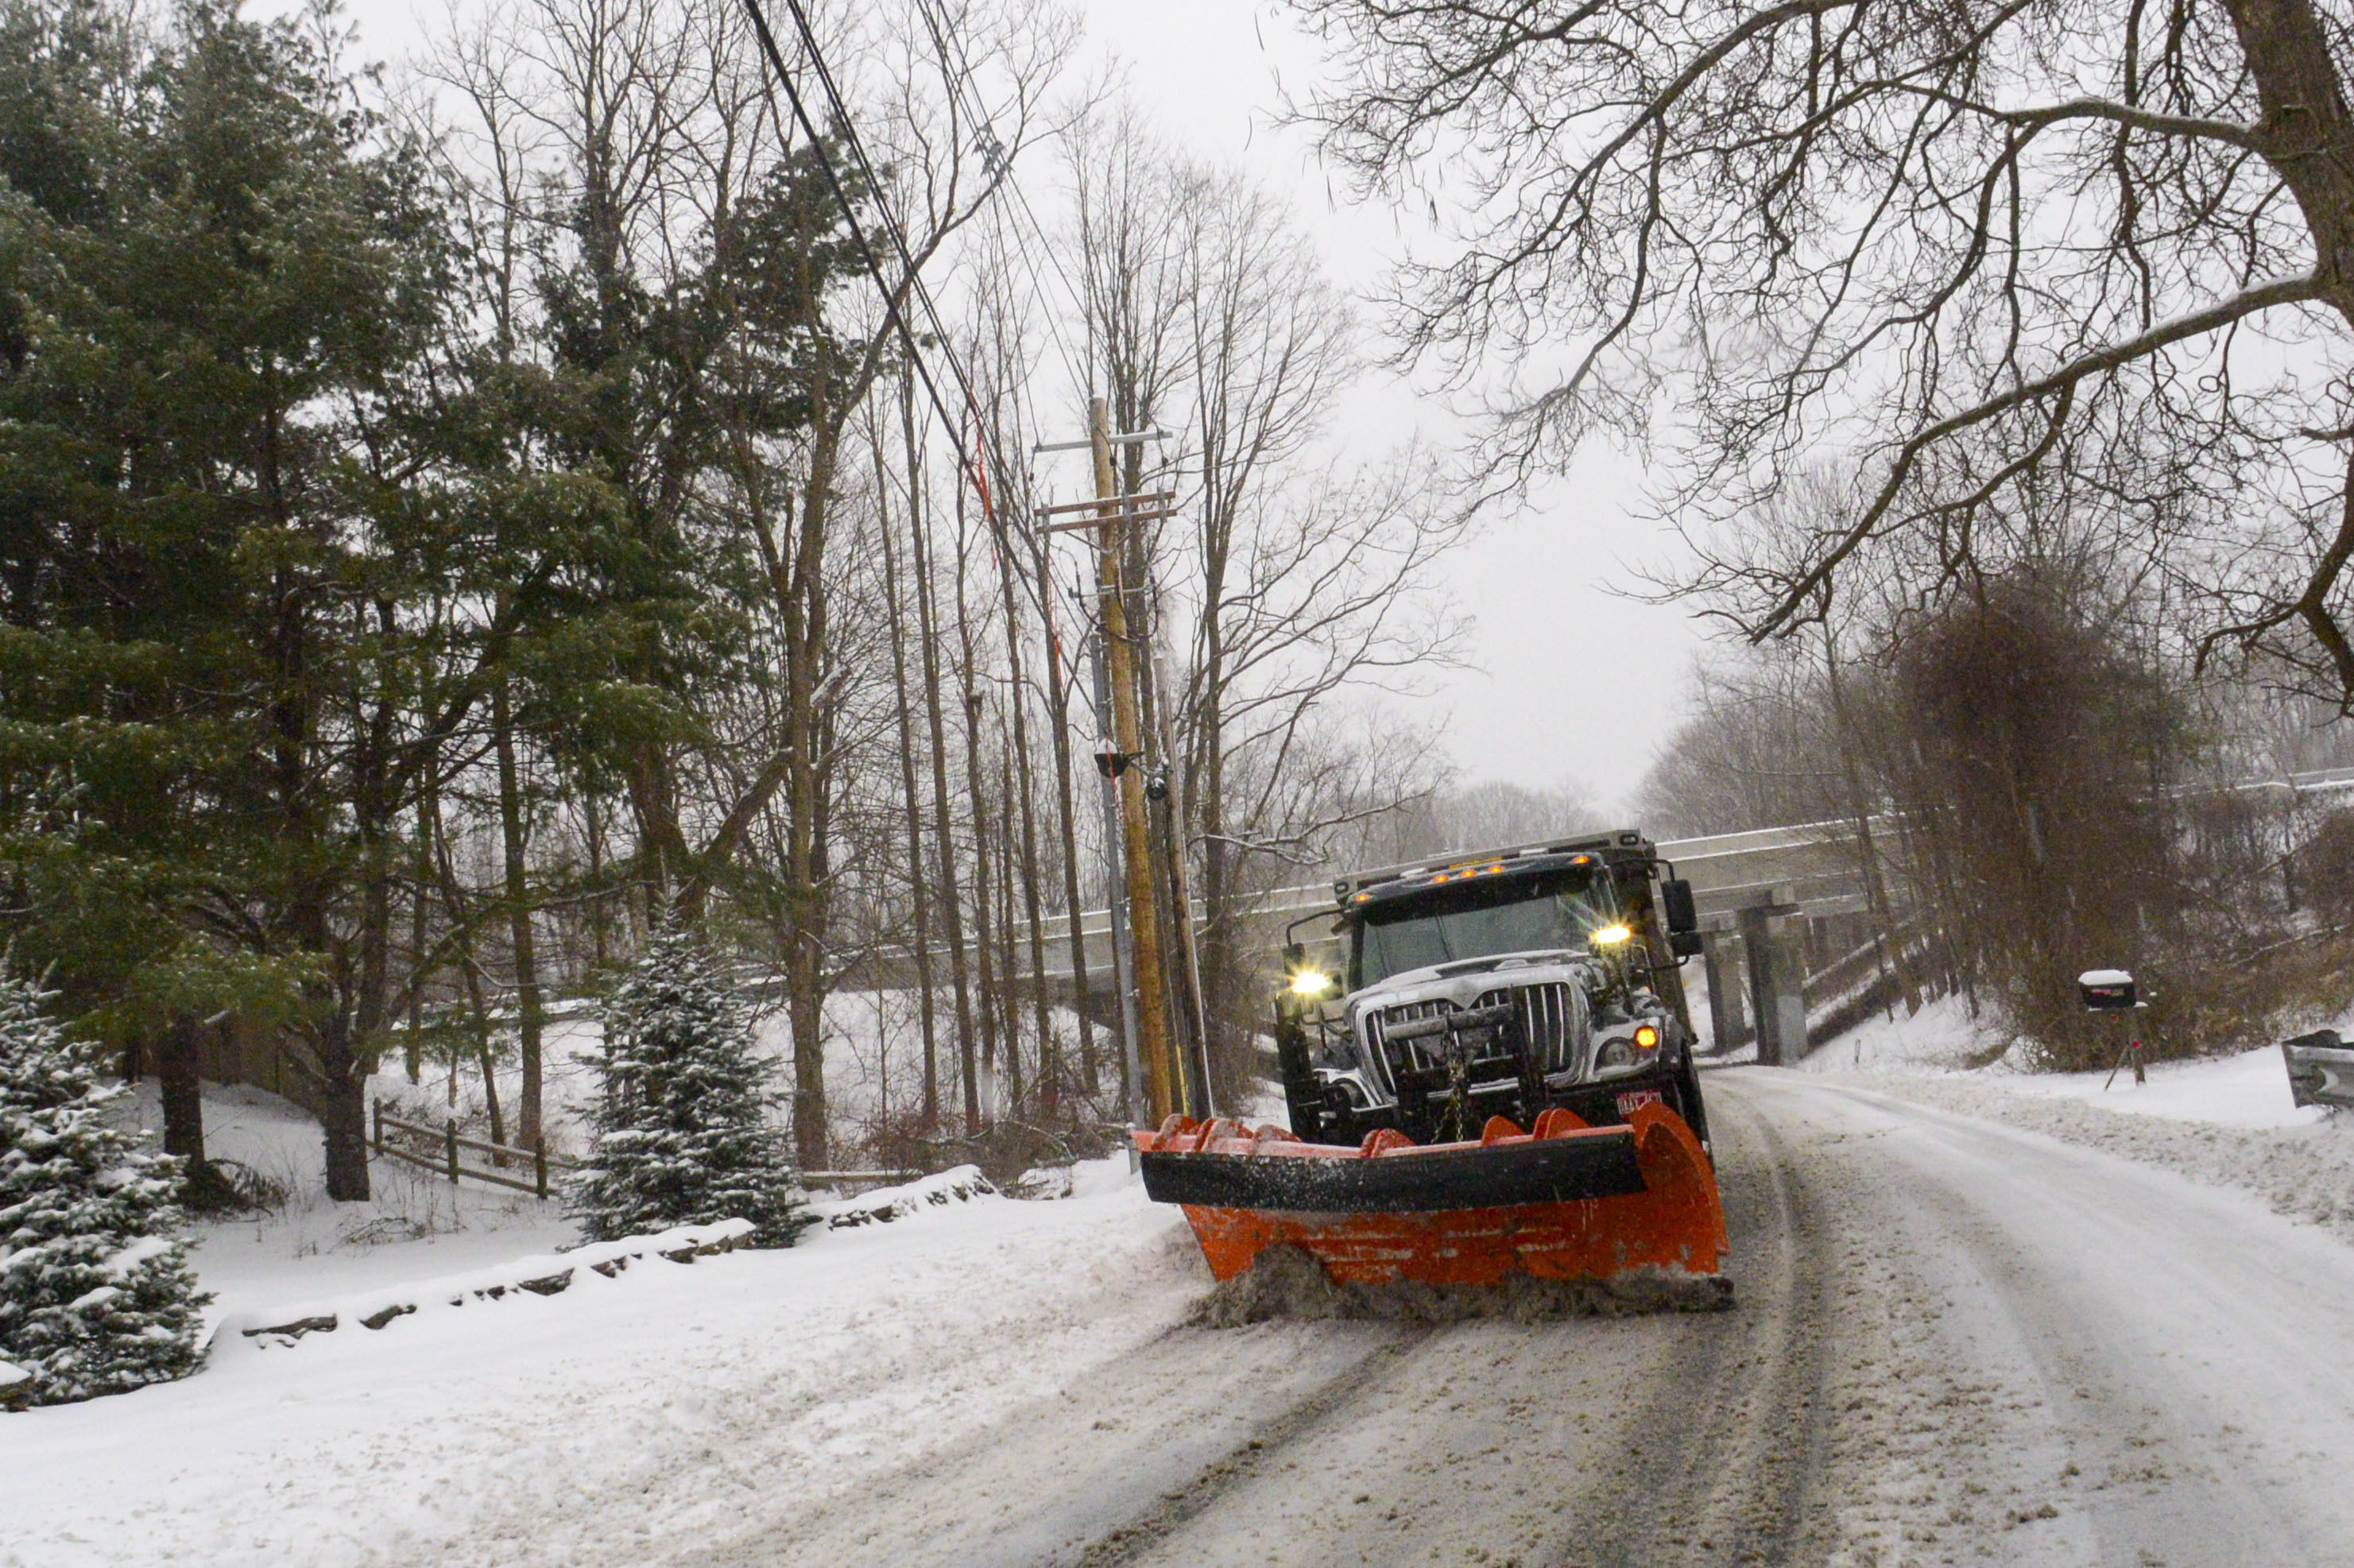 Wintry weather blankets New England and California mountains as storm